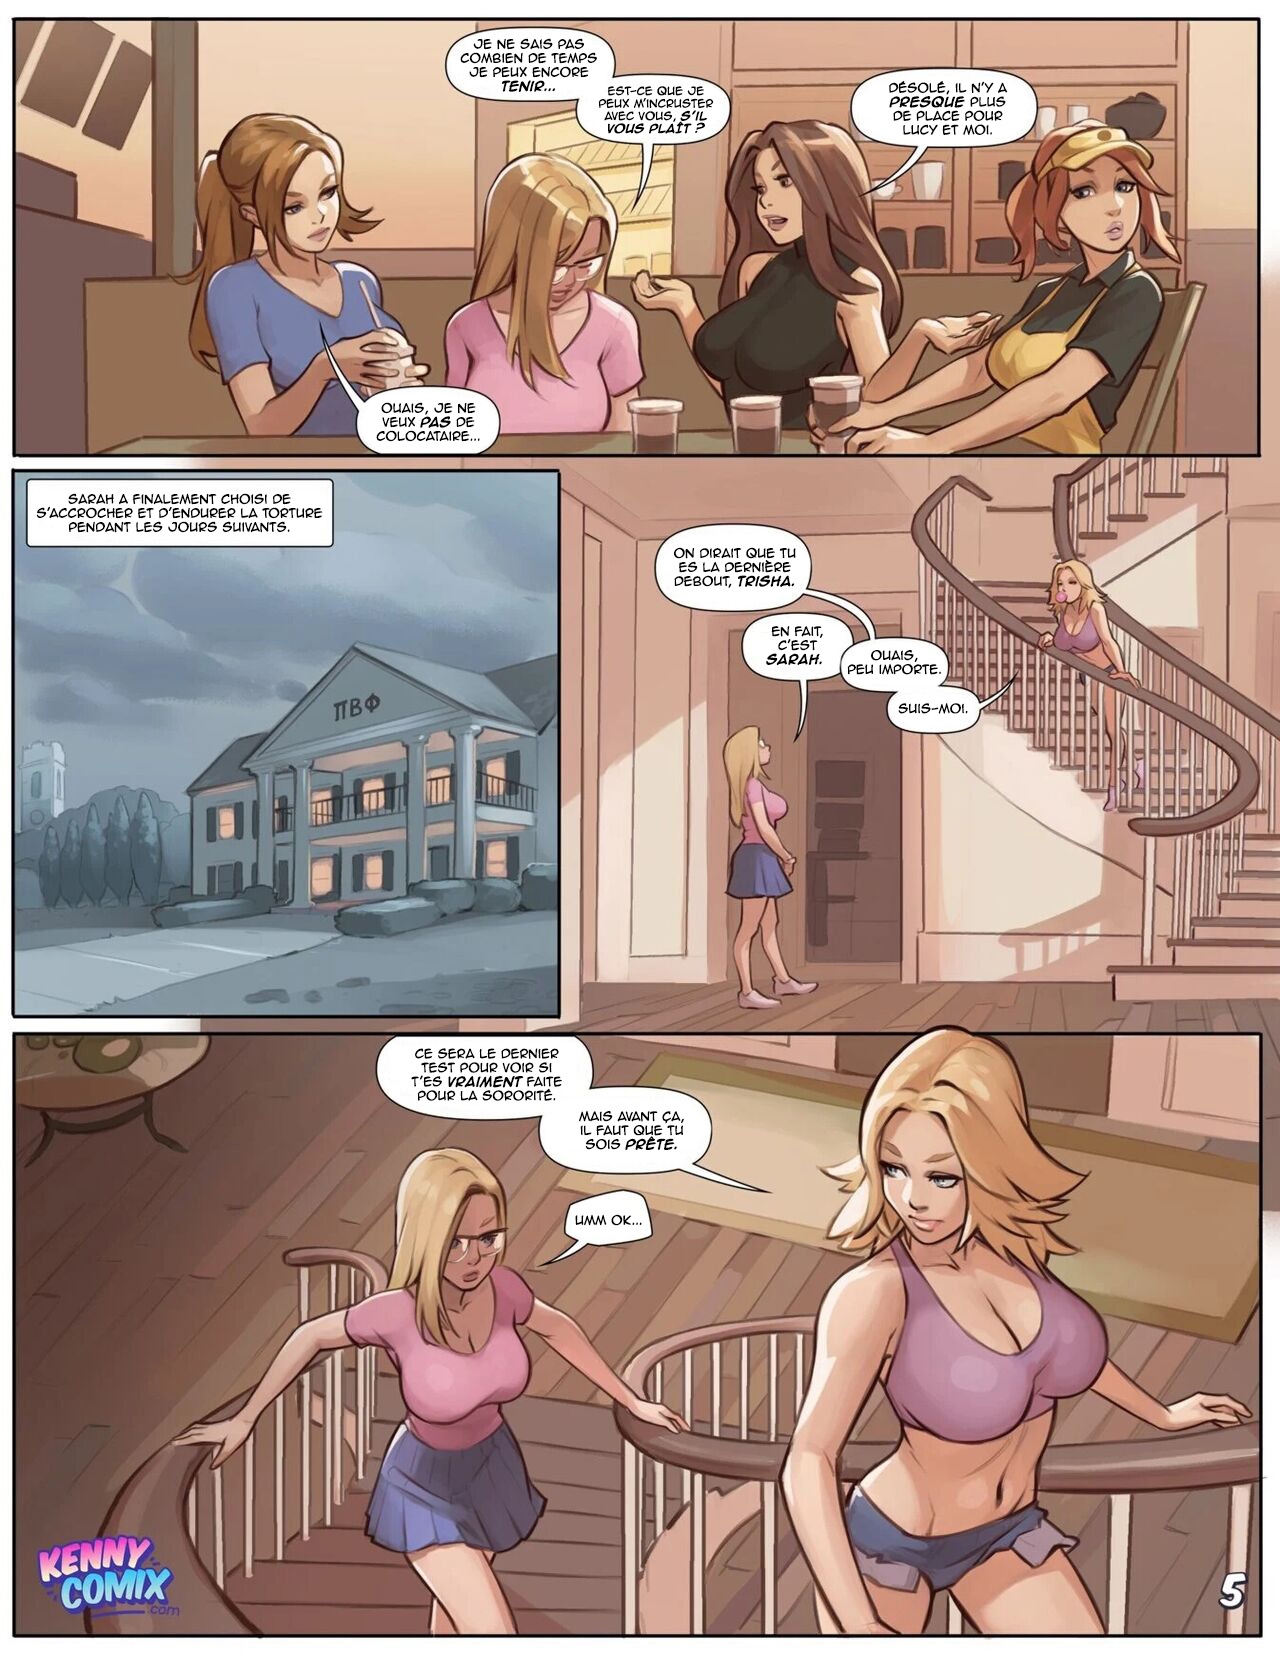 [Kenny Comix ( Voidwave)] Naughty Sorority: The New Pledge [French] 5